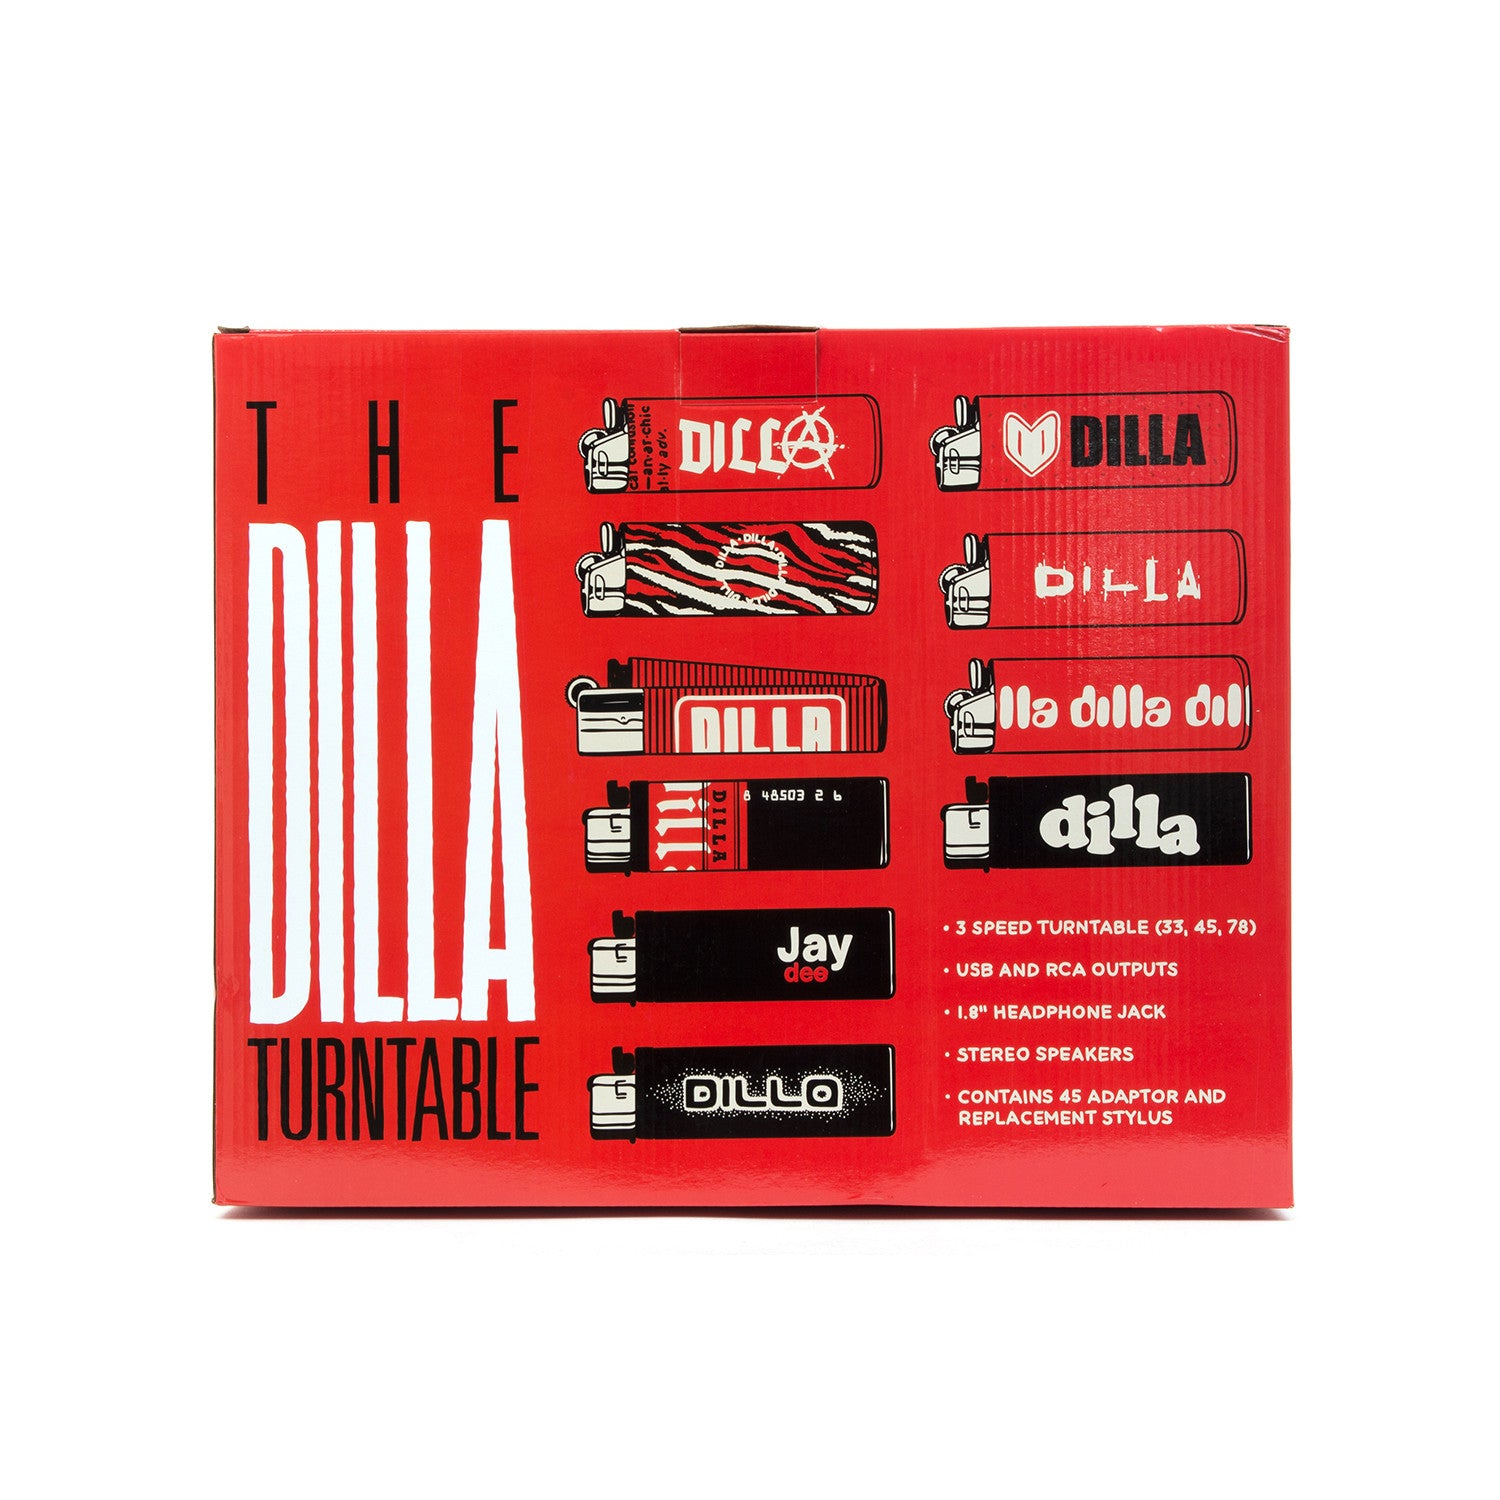 The Dilla Turnable by Pay Jay